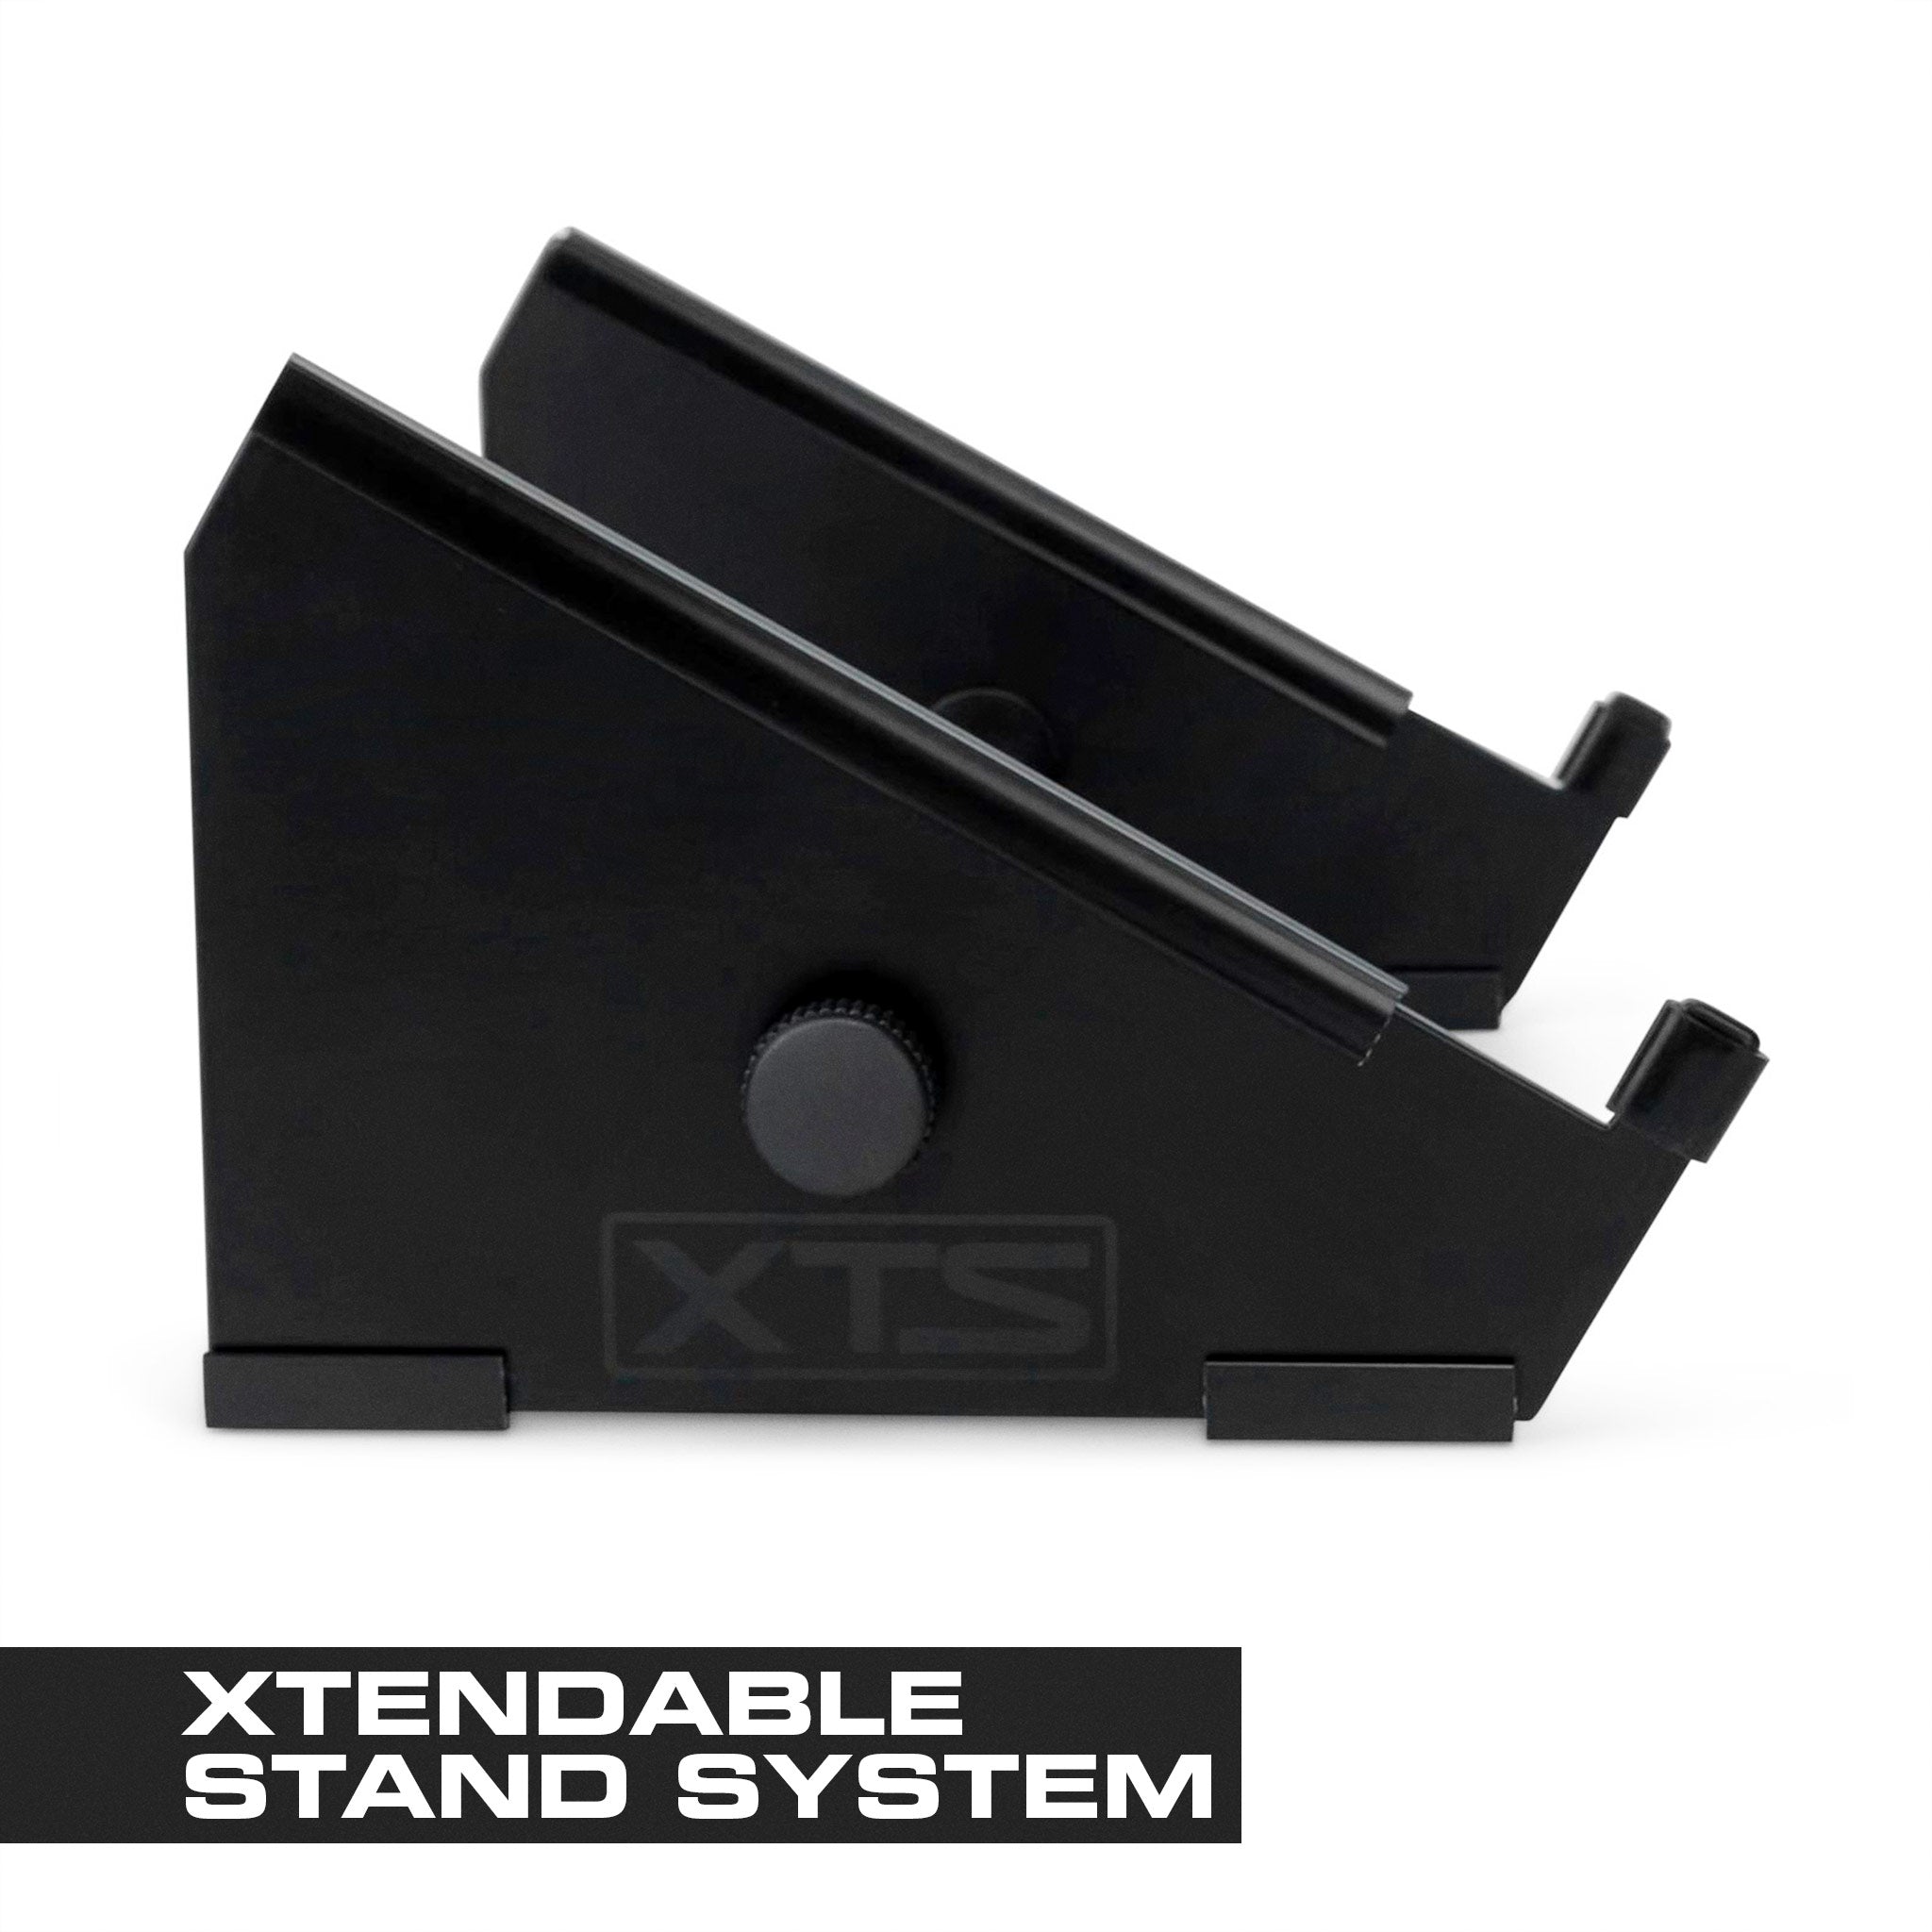 XTS Stand: Large